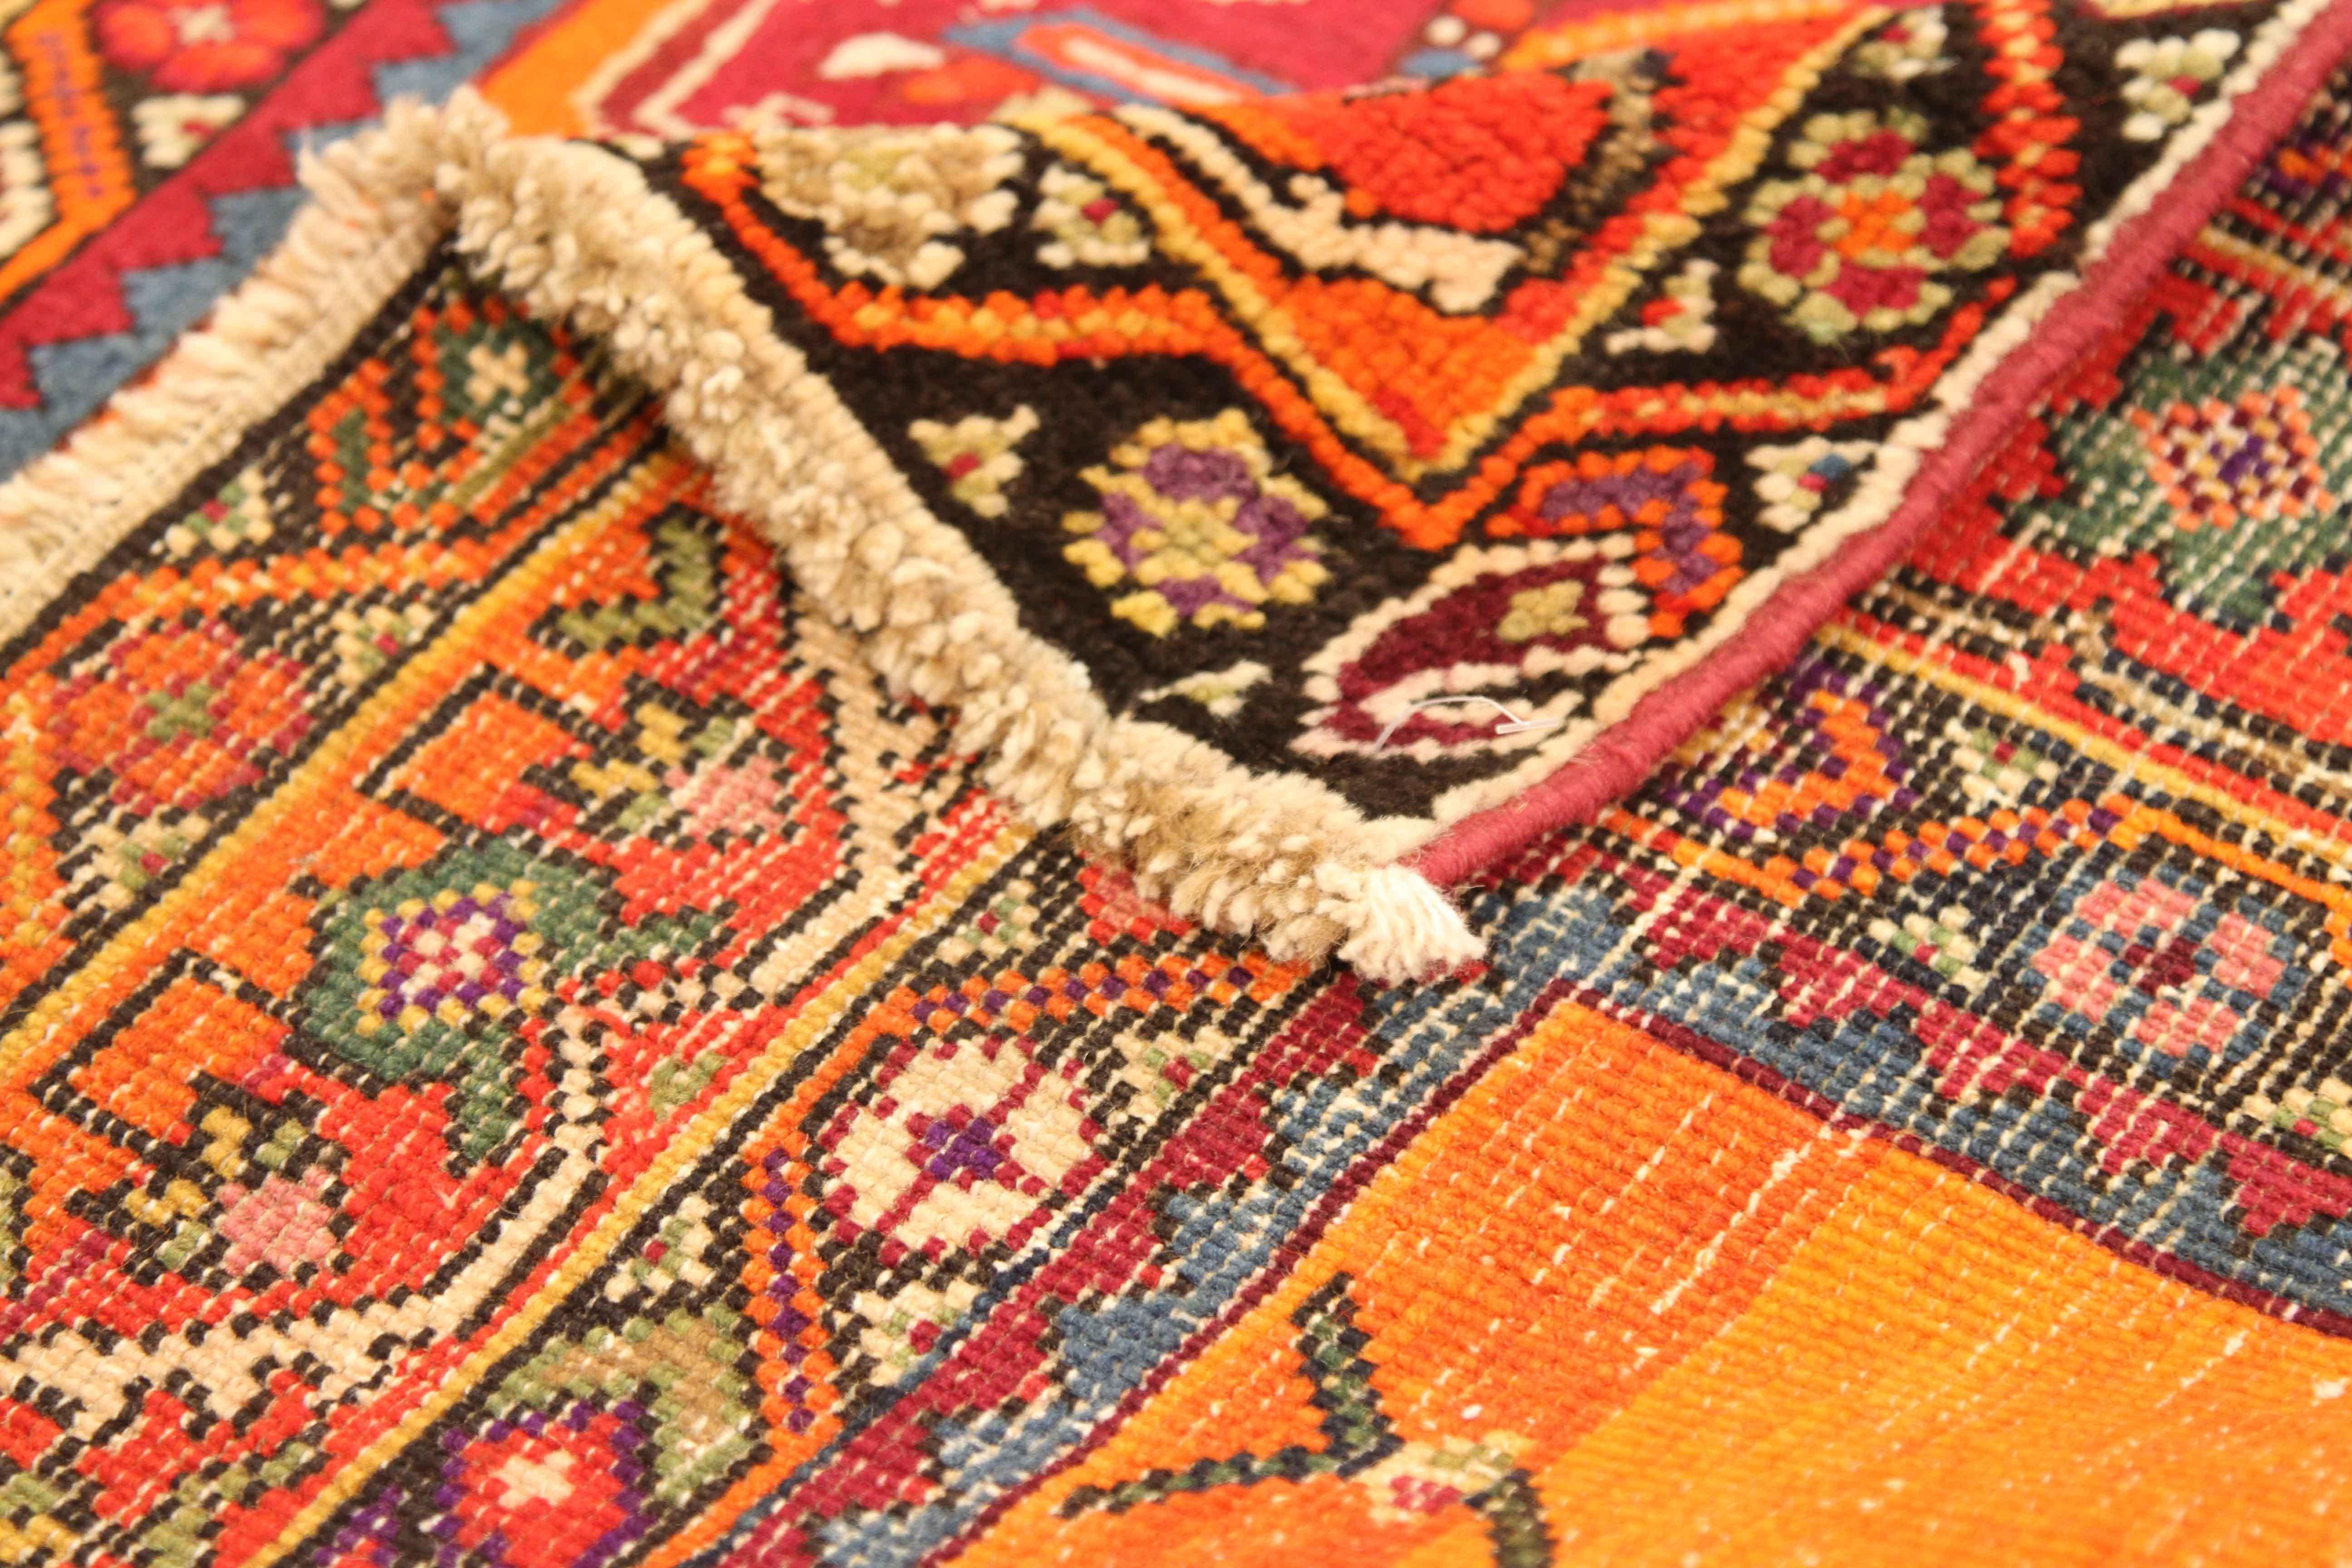 Handmade in the 1950s from the best quality of wool and vegetable dyes. The antique Persian rug was given the bold color palette of red, black, blue, and orange to highlight the large green gemstone details on the field. Karabagh weavers became